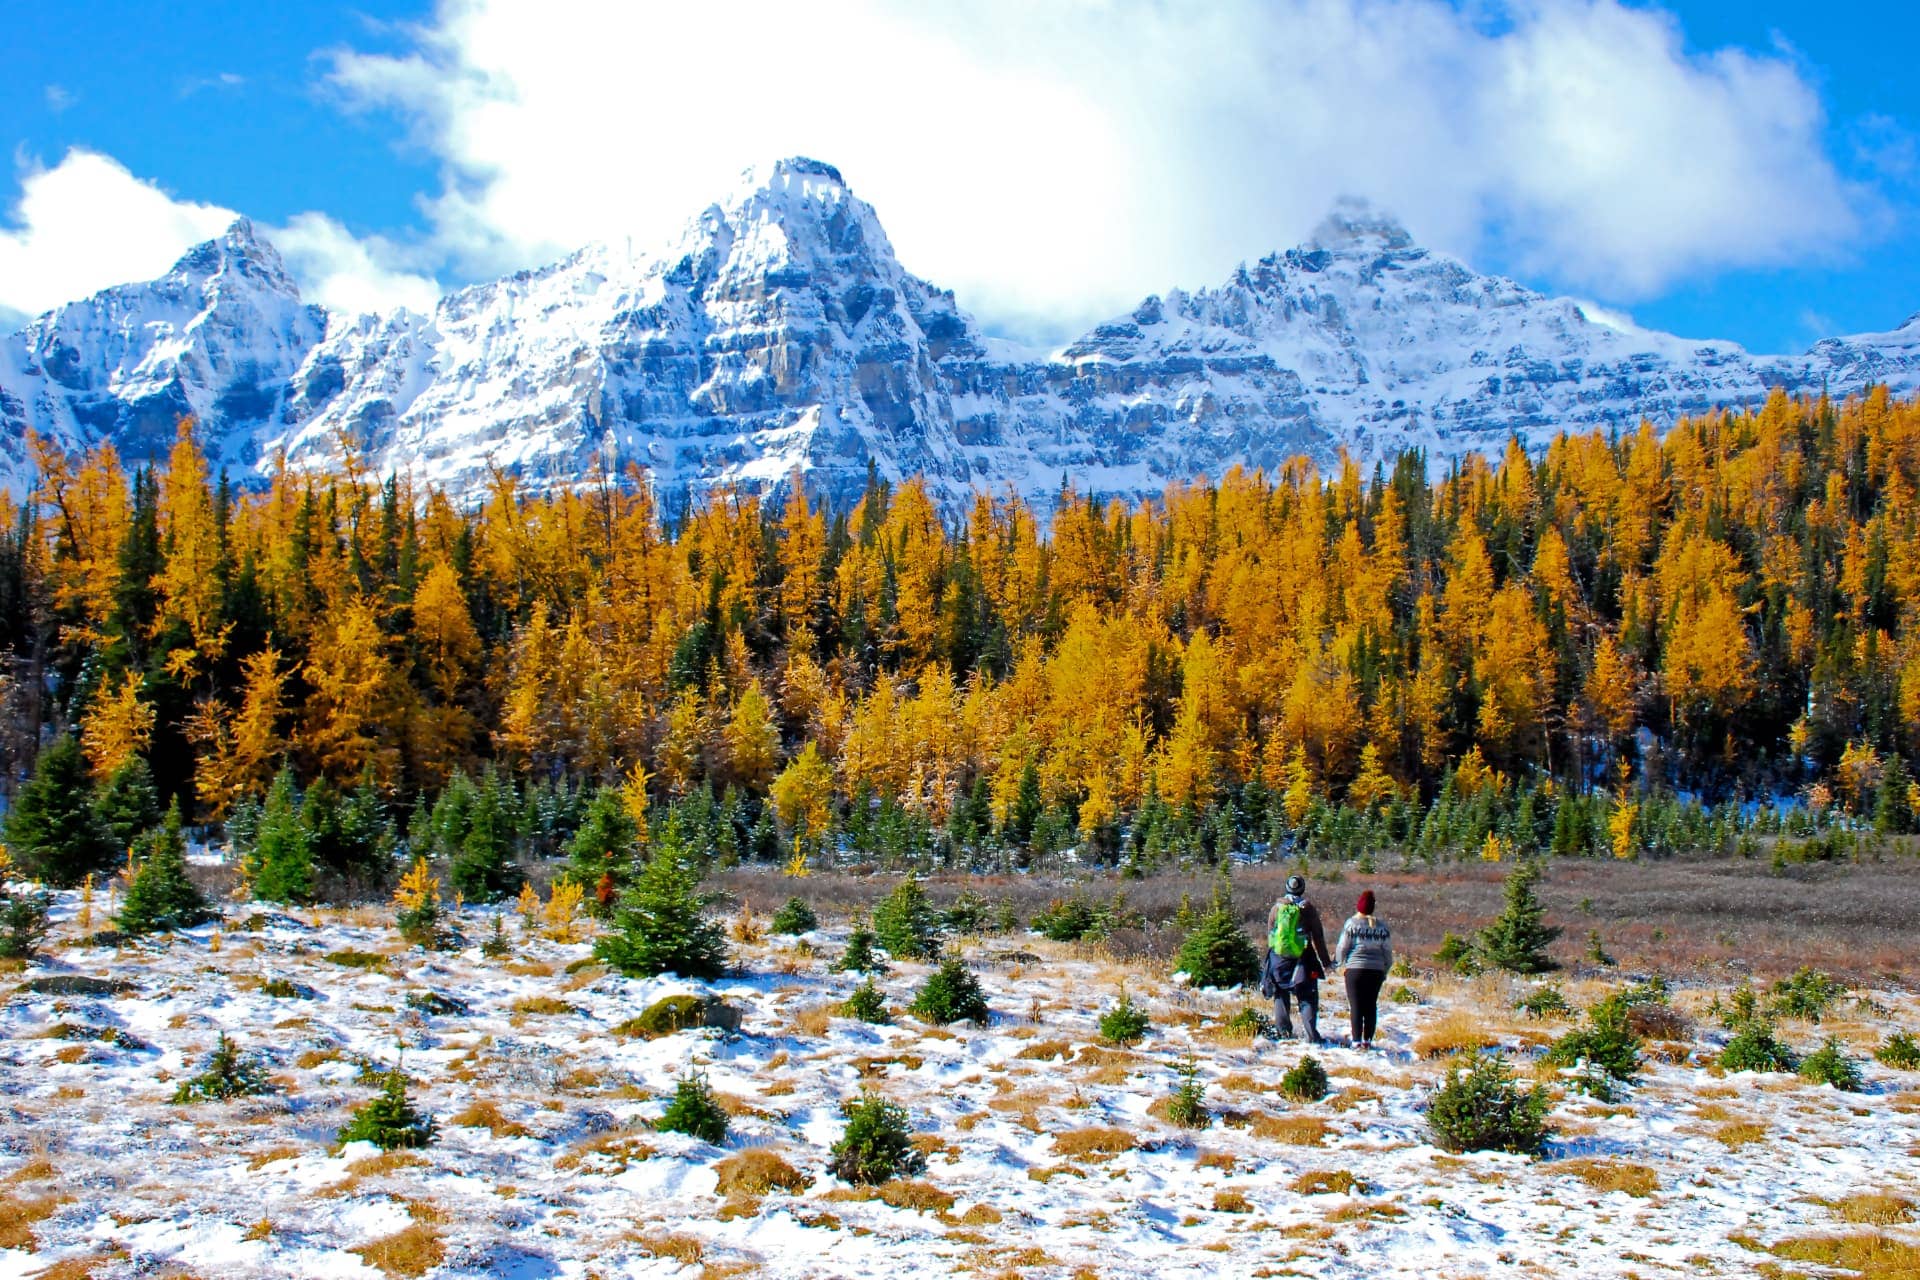 Two people standing on snow covered ground with yellow leaf trees and mountains in background